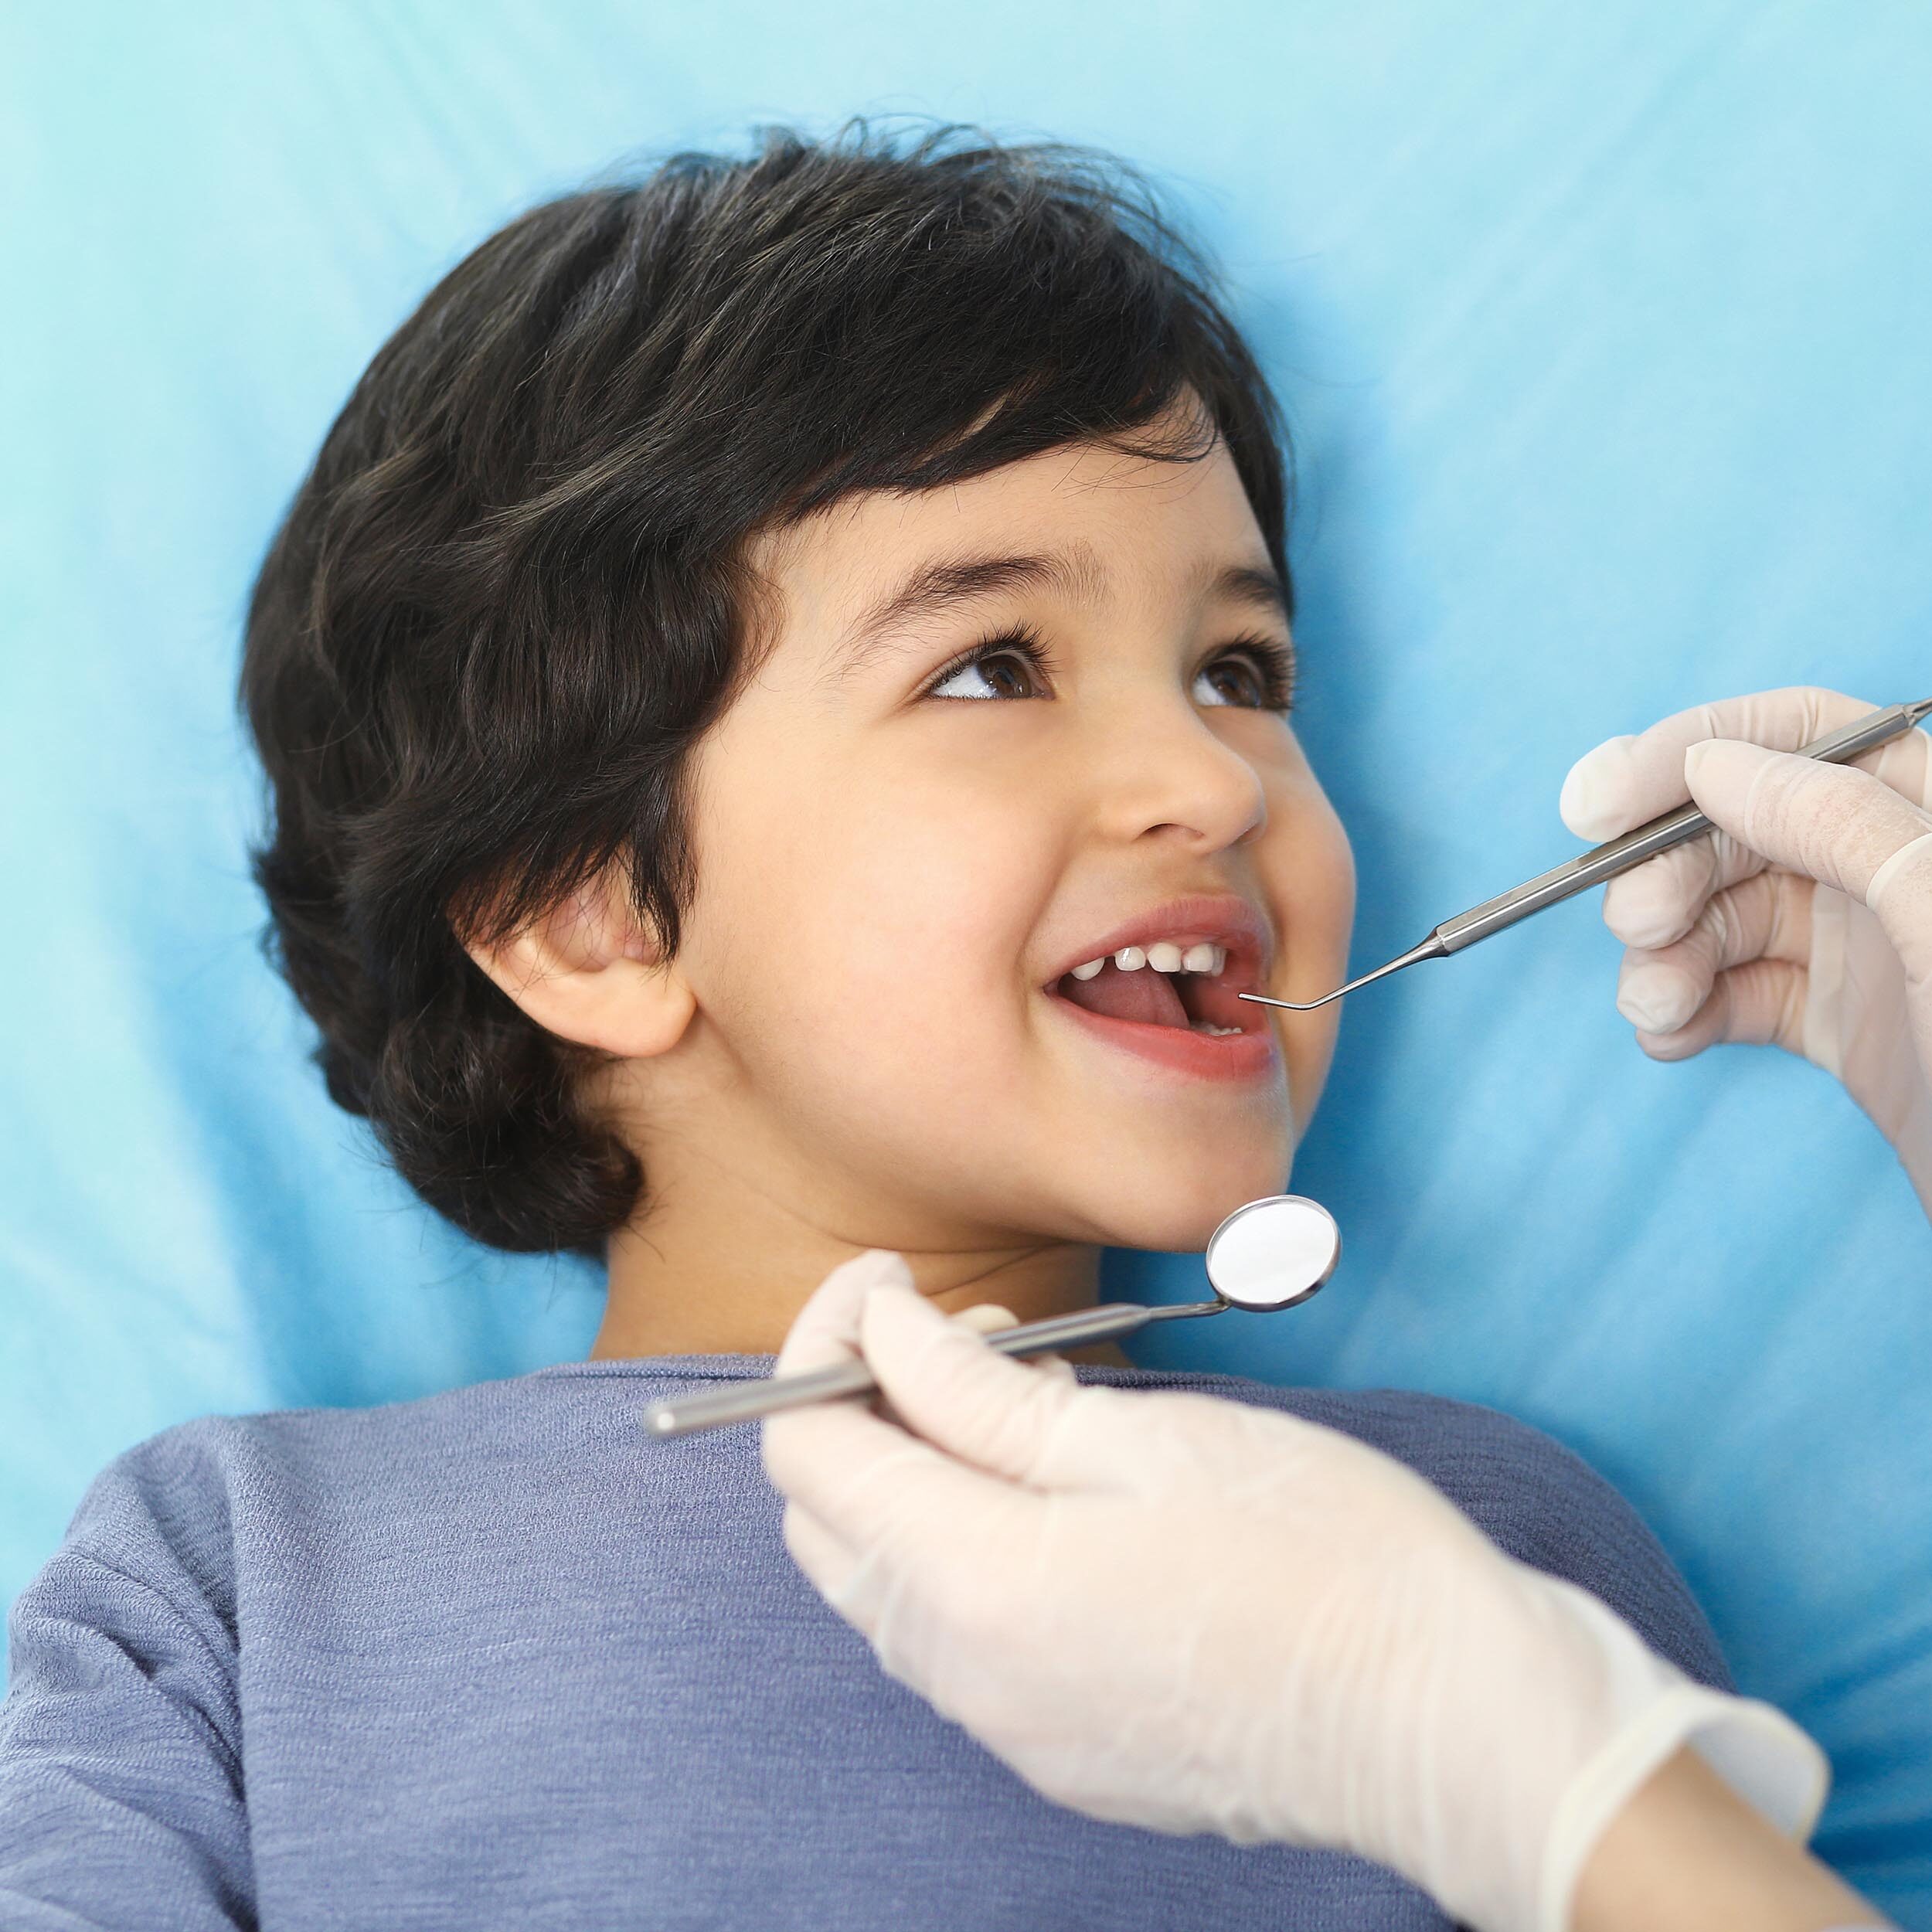 A child getting his teeth cleaned by a dentist, who is examining the boy's teeth for extraction.